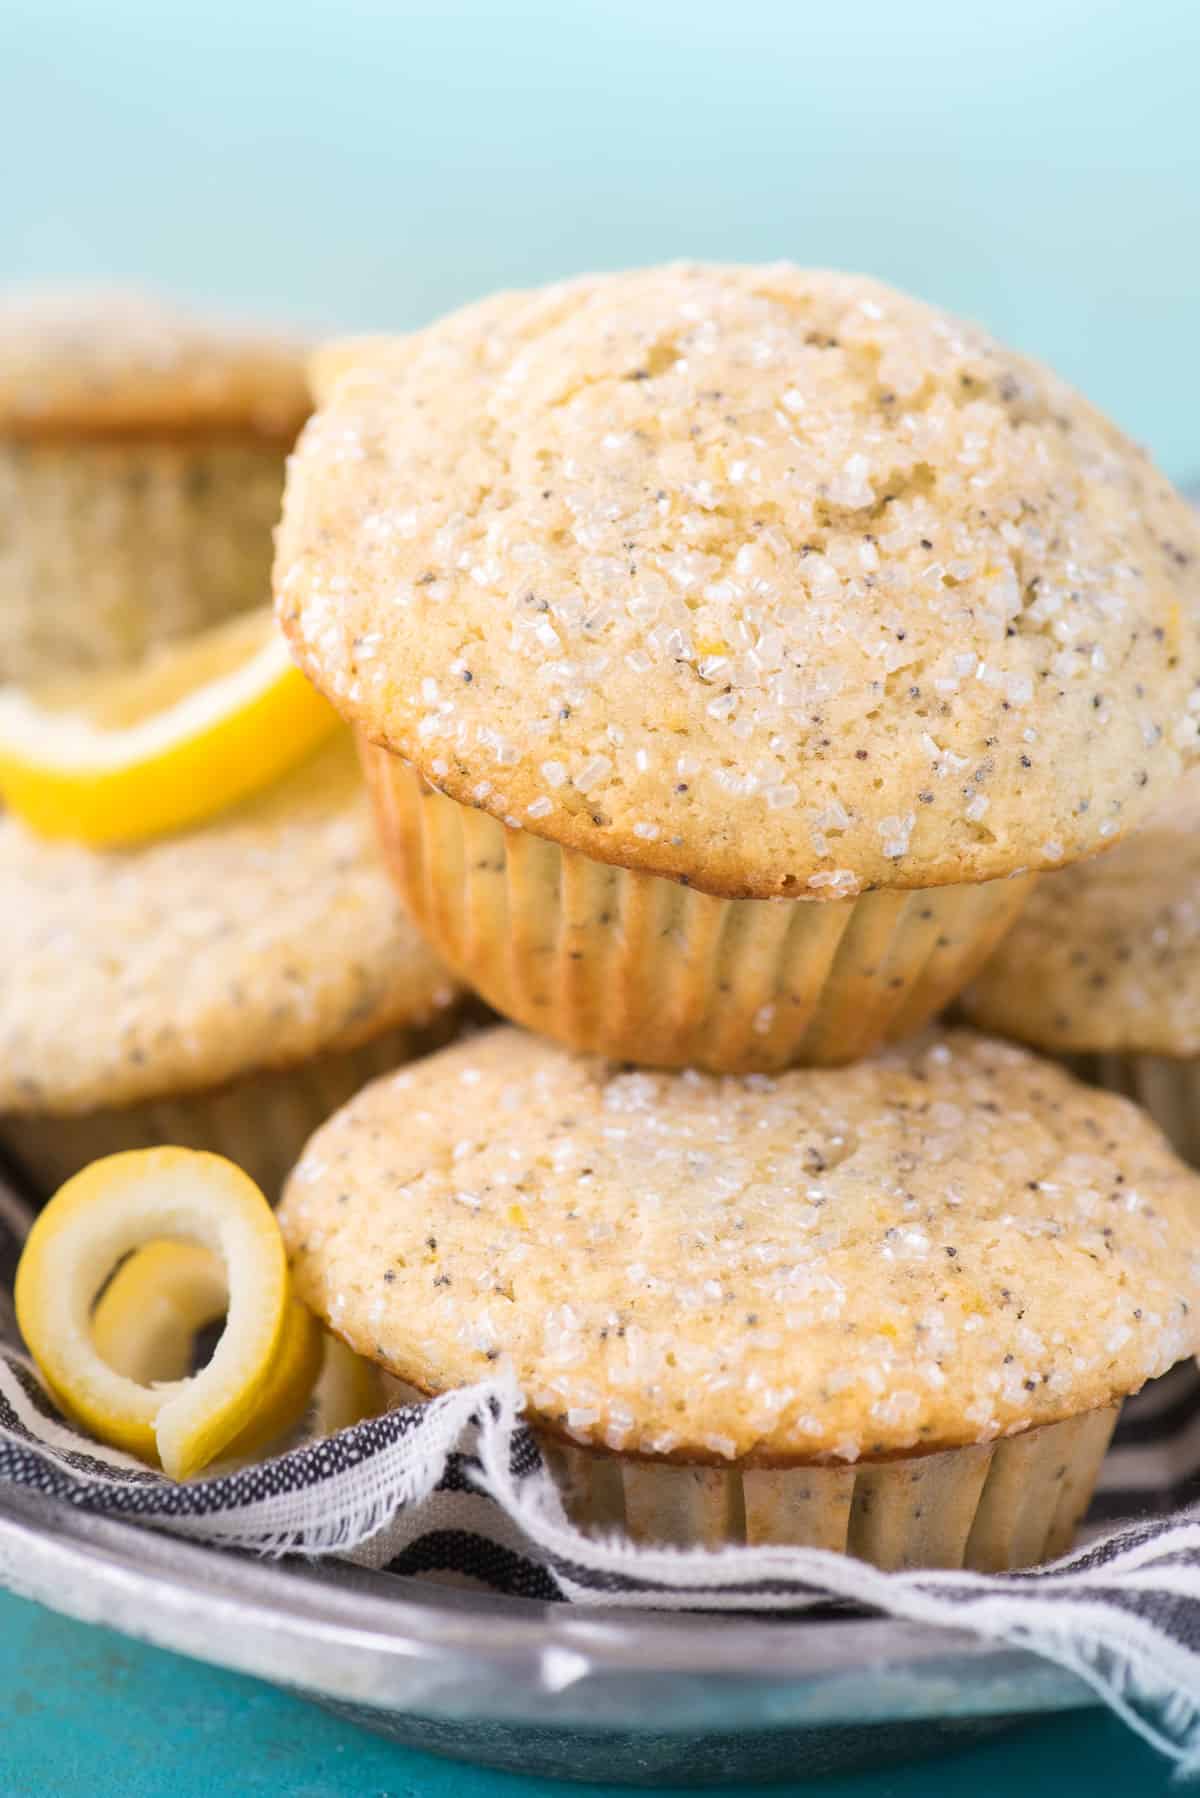 lemon poppy seed muffins stacked on top of each other in metal dish with blue striped cloth